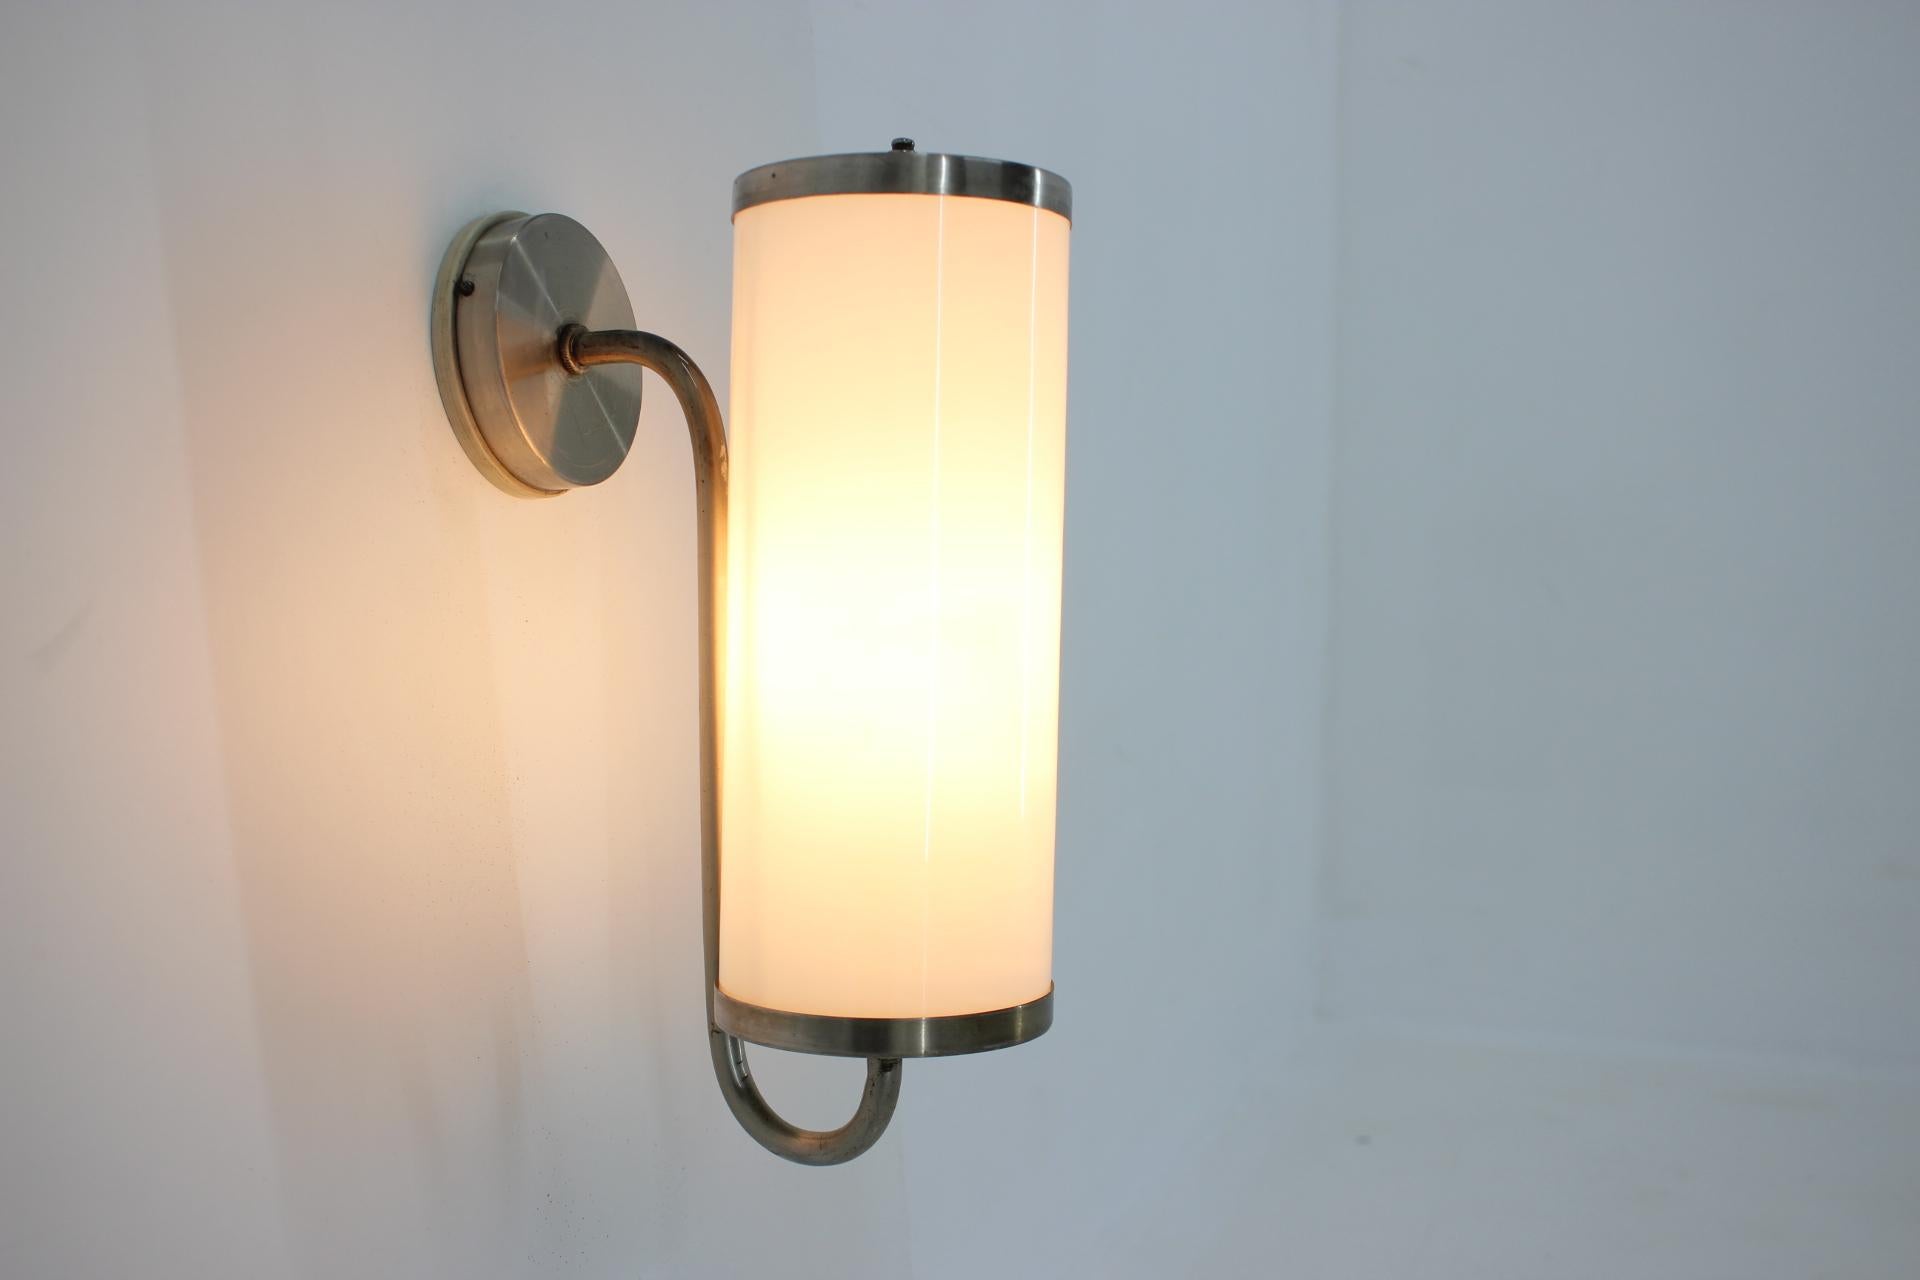 Mid-20th Century Bauhaus Chrome Wall Lamp/Scone, 1930s For Sale